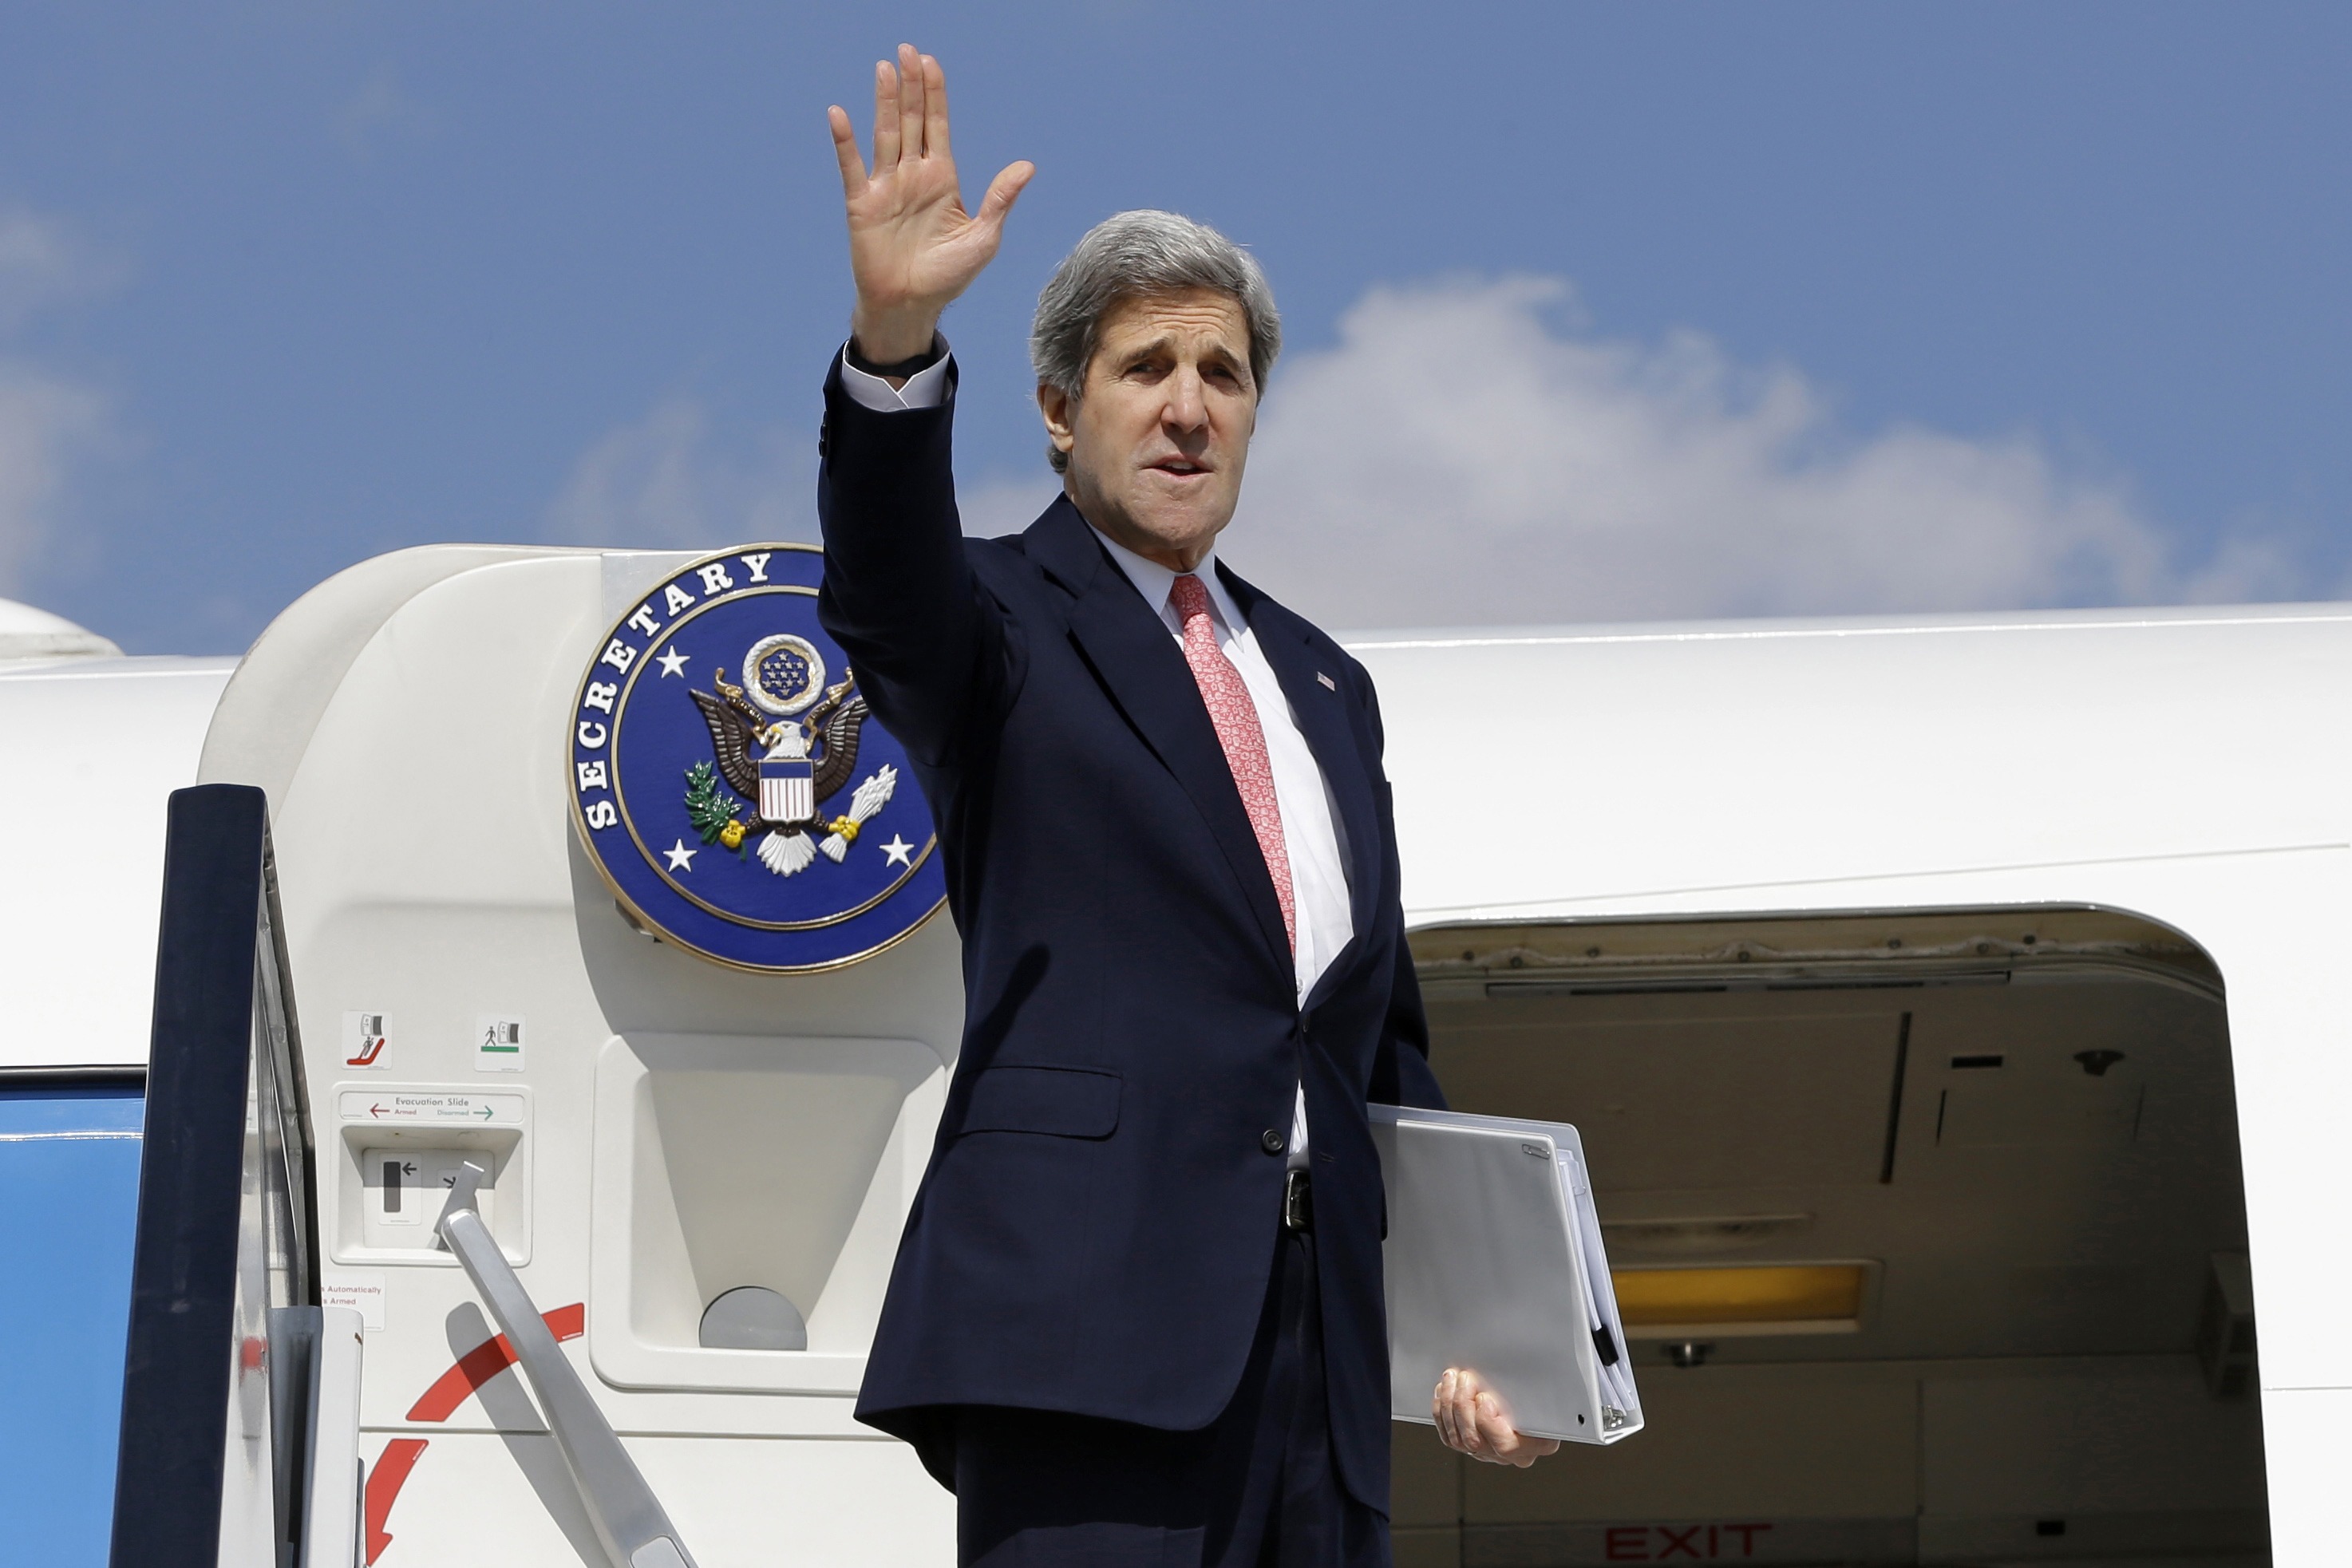 U.S. not severing ties with Egypt through aid cuts - Kerry